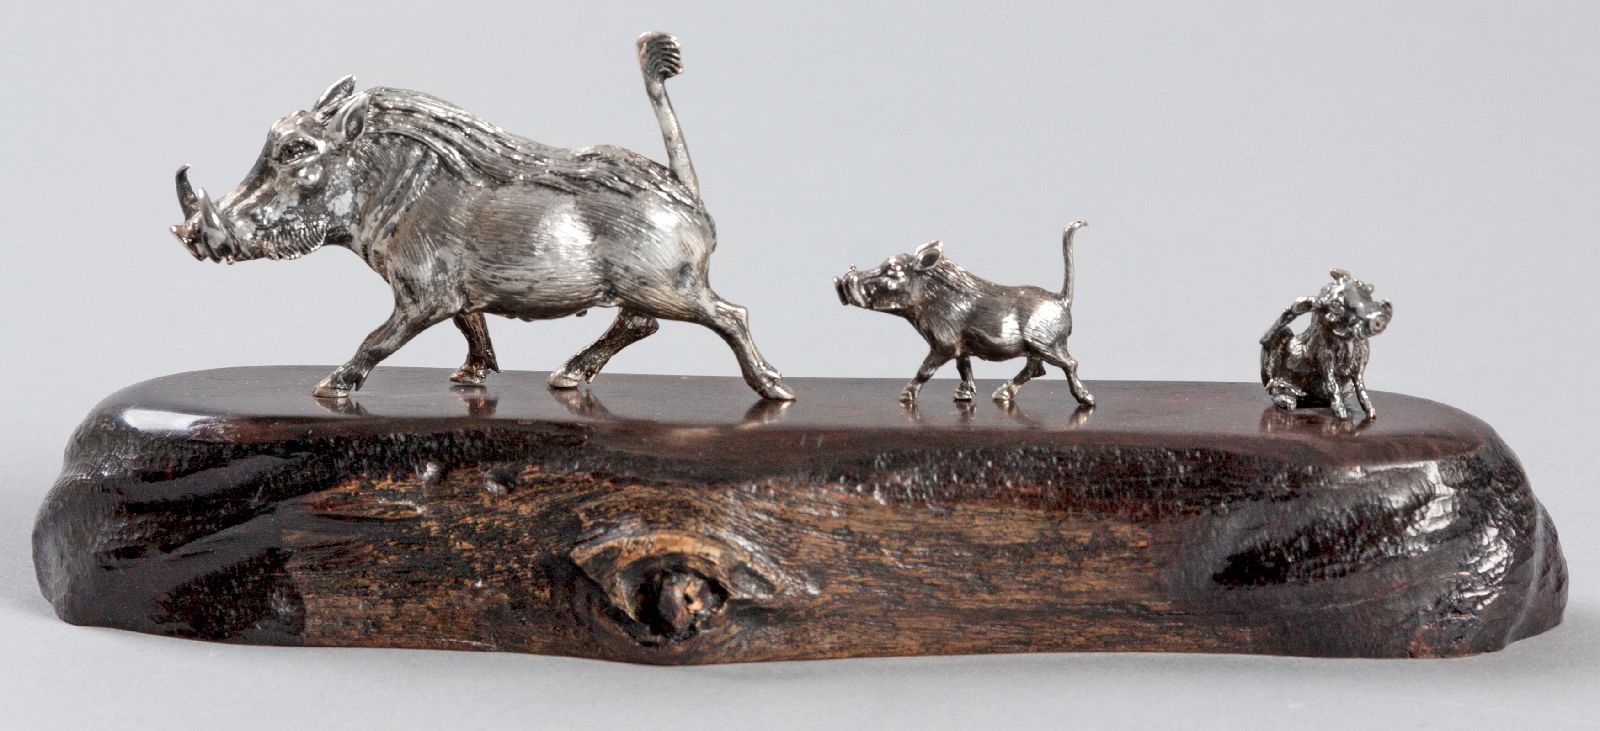 A PATRICK MAVROS SILVER SCULPTURE, of a female warthog with her two piglets, mounted on a